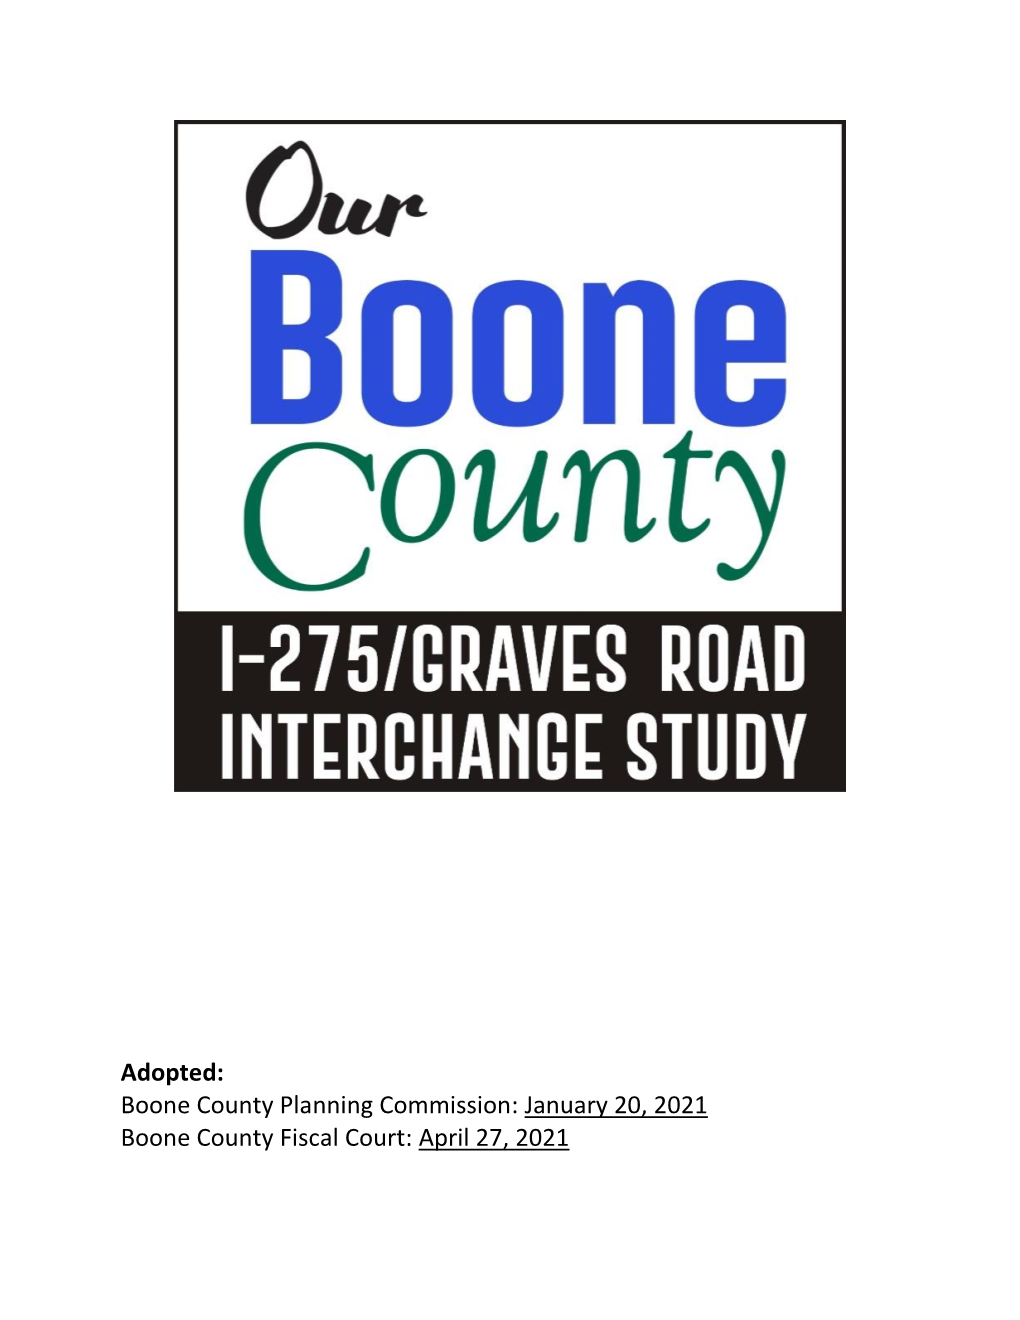 I-275/Graves Road Interchange Study Area Is the 860 Acres of Suburban Density Residential (SD) Shown on Both the North and South Sides of the Interstate